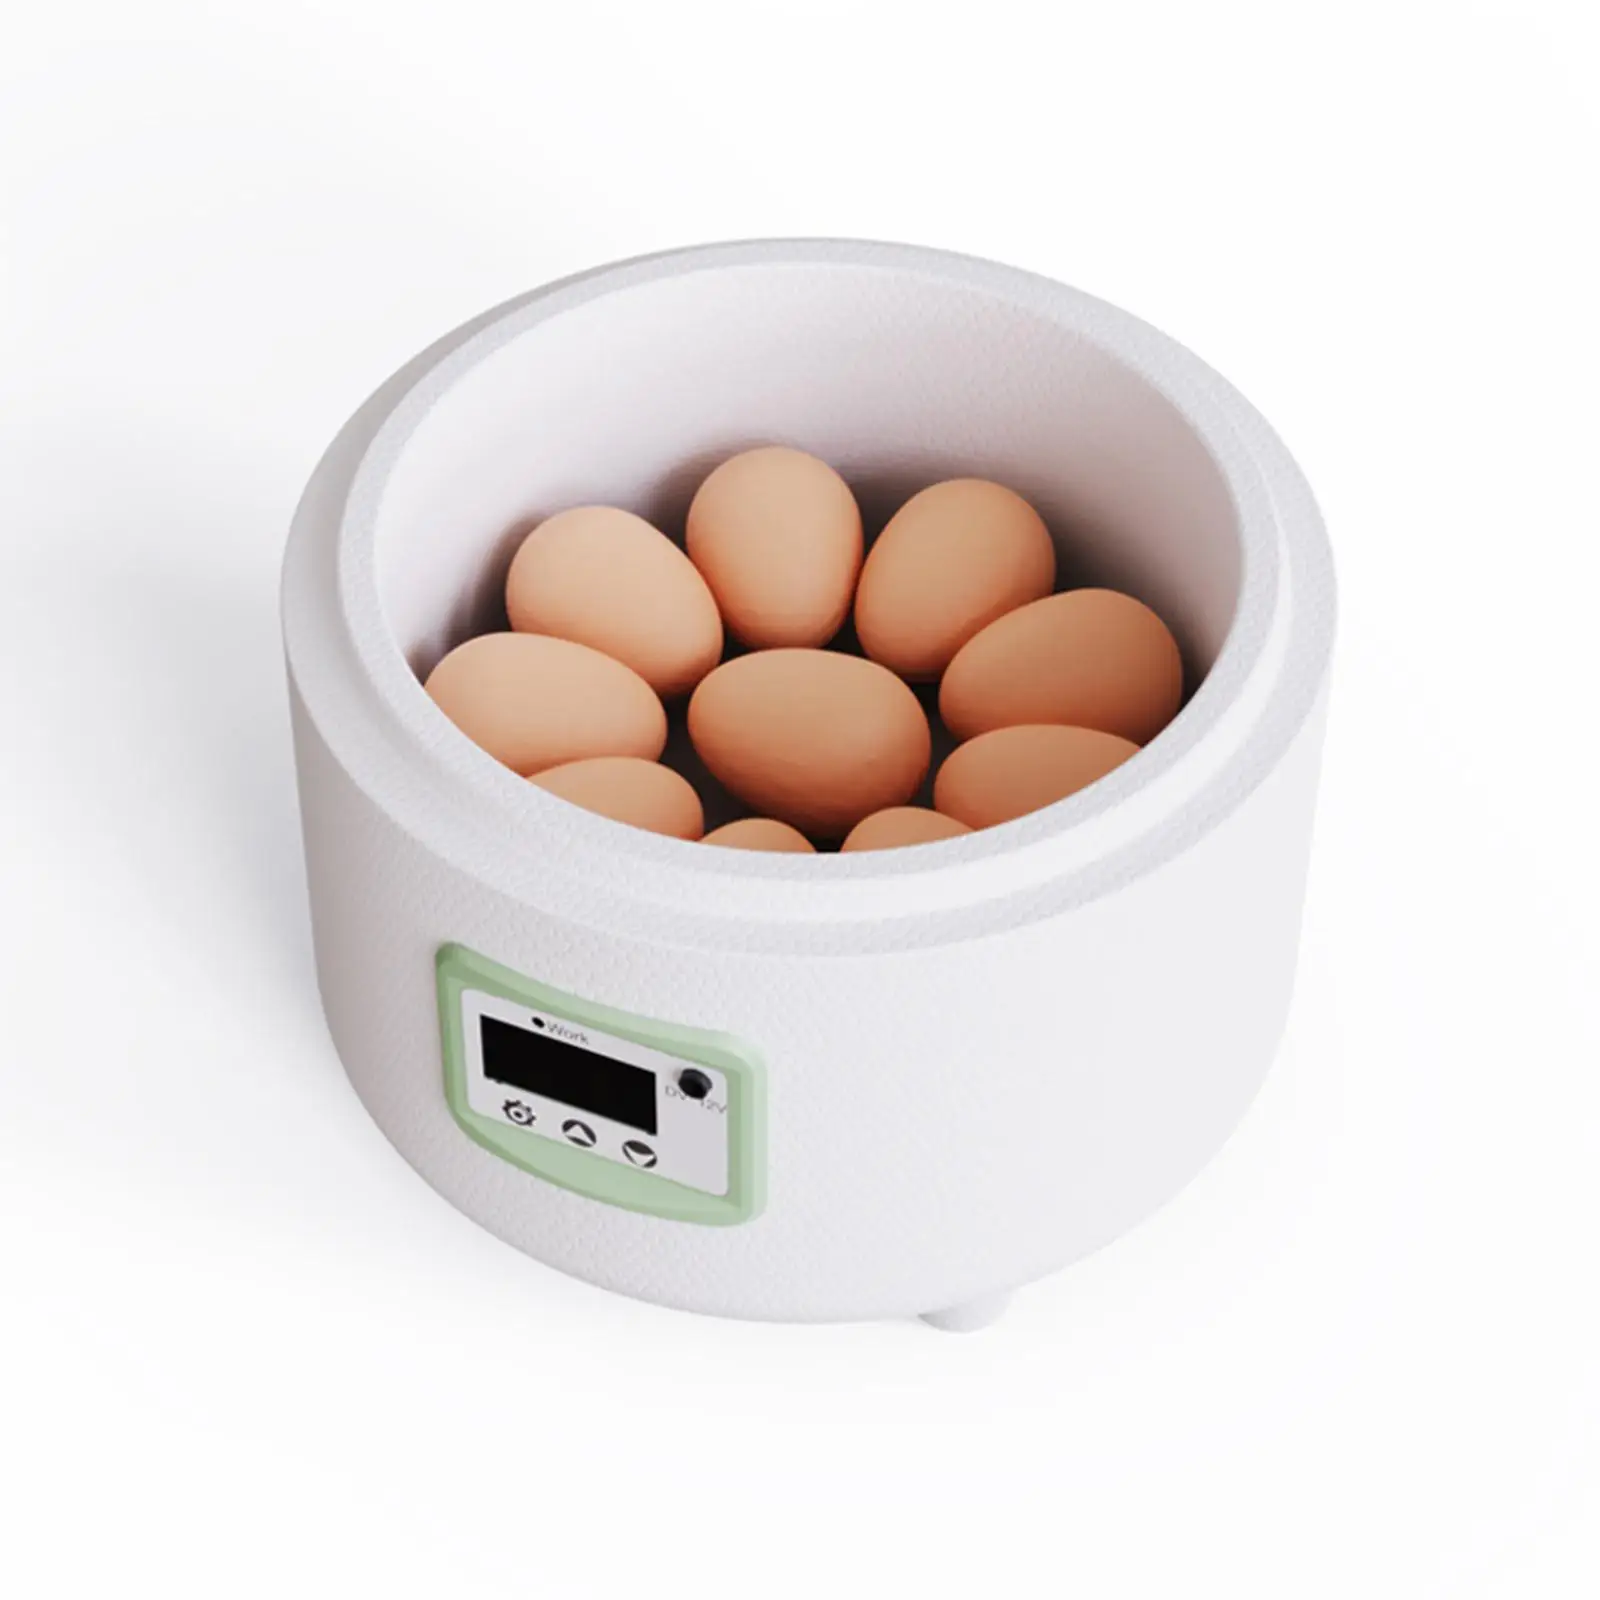 Digital Automatic Egg Incubator Poultry Hatcher for Hatching Turkey Parakeet